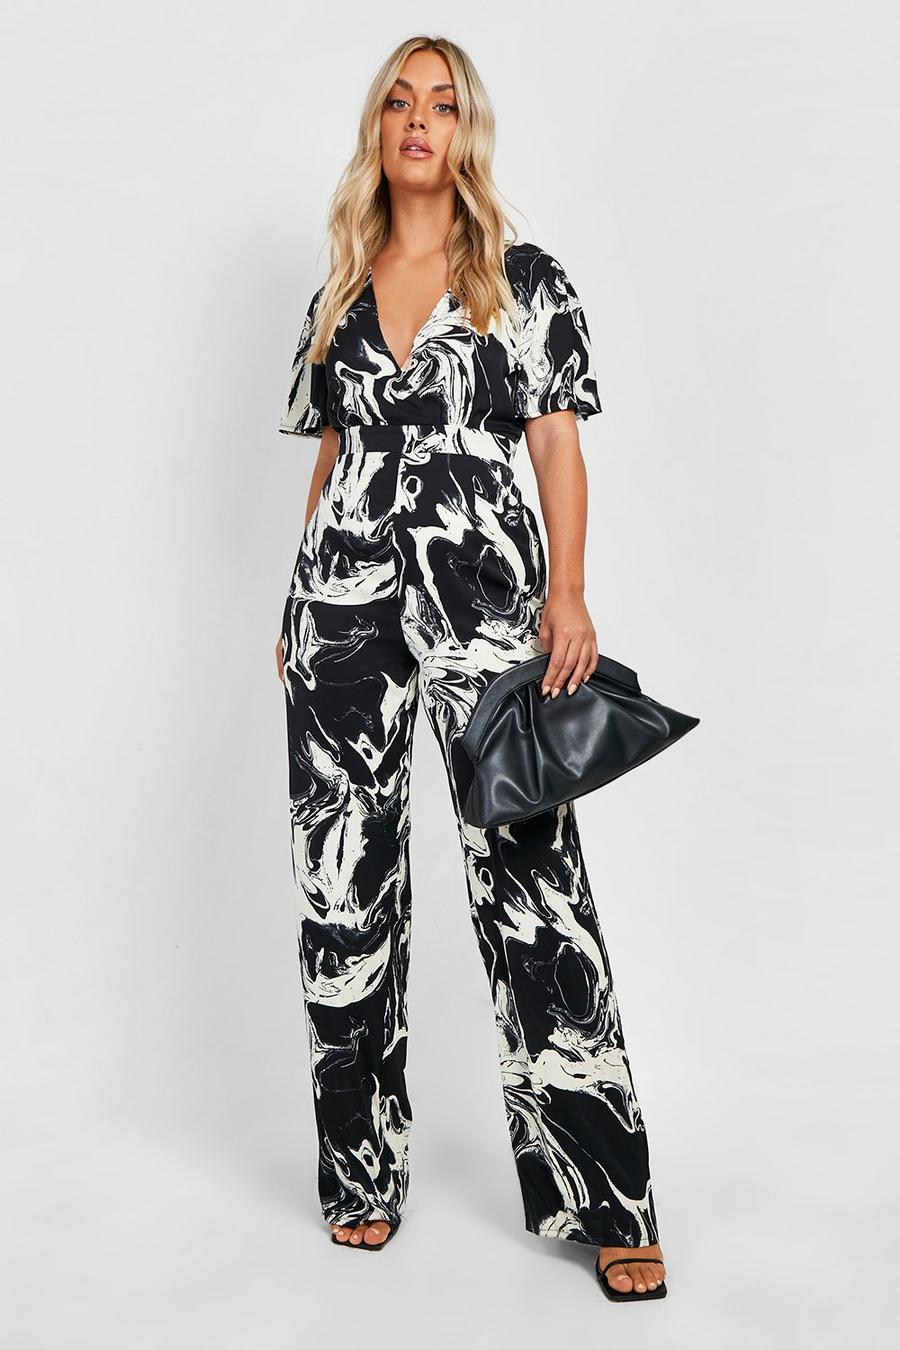 Boohoo Plus Marble Print Woven Angel Wing Jumpsuit in Black Womens Clothing Jumpsuits and rompers Playsuits 